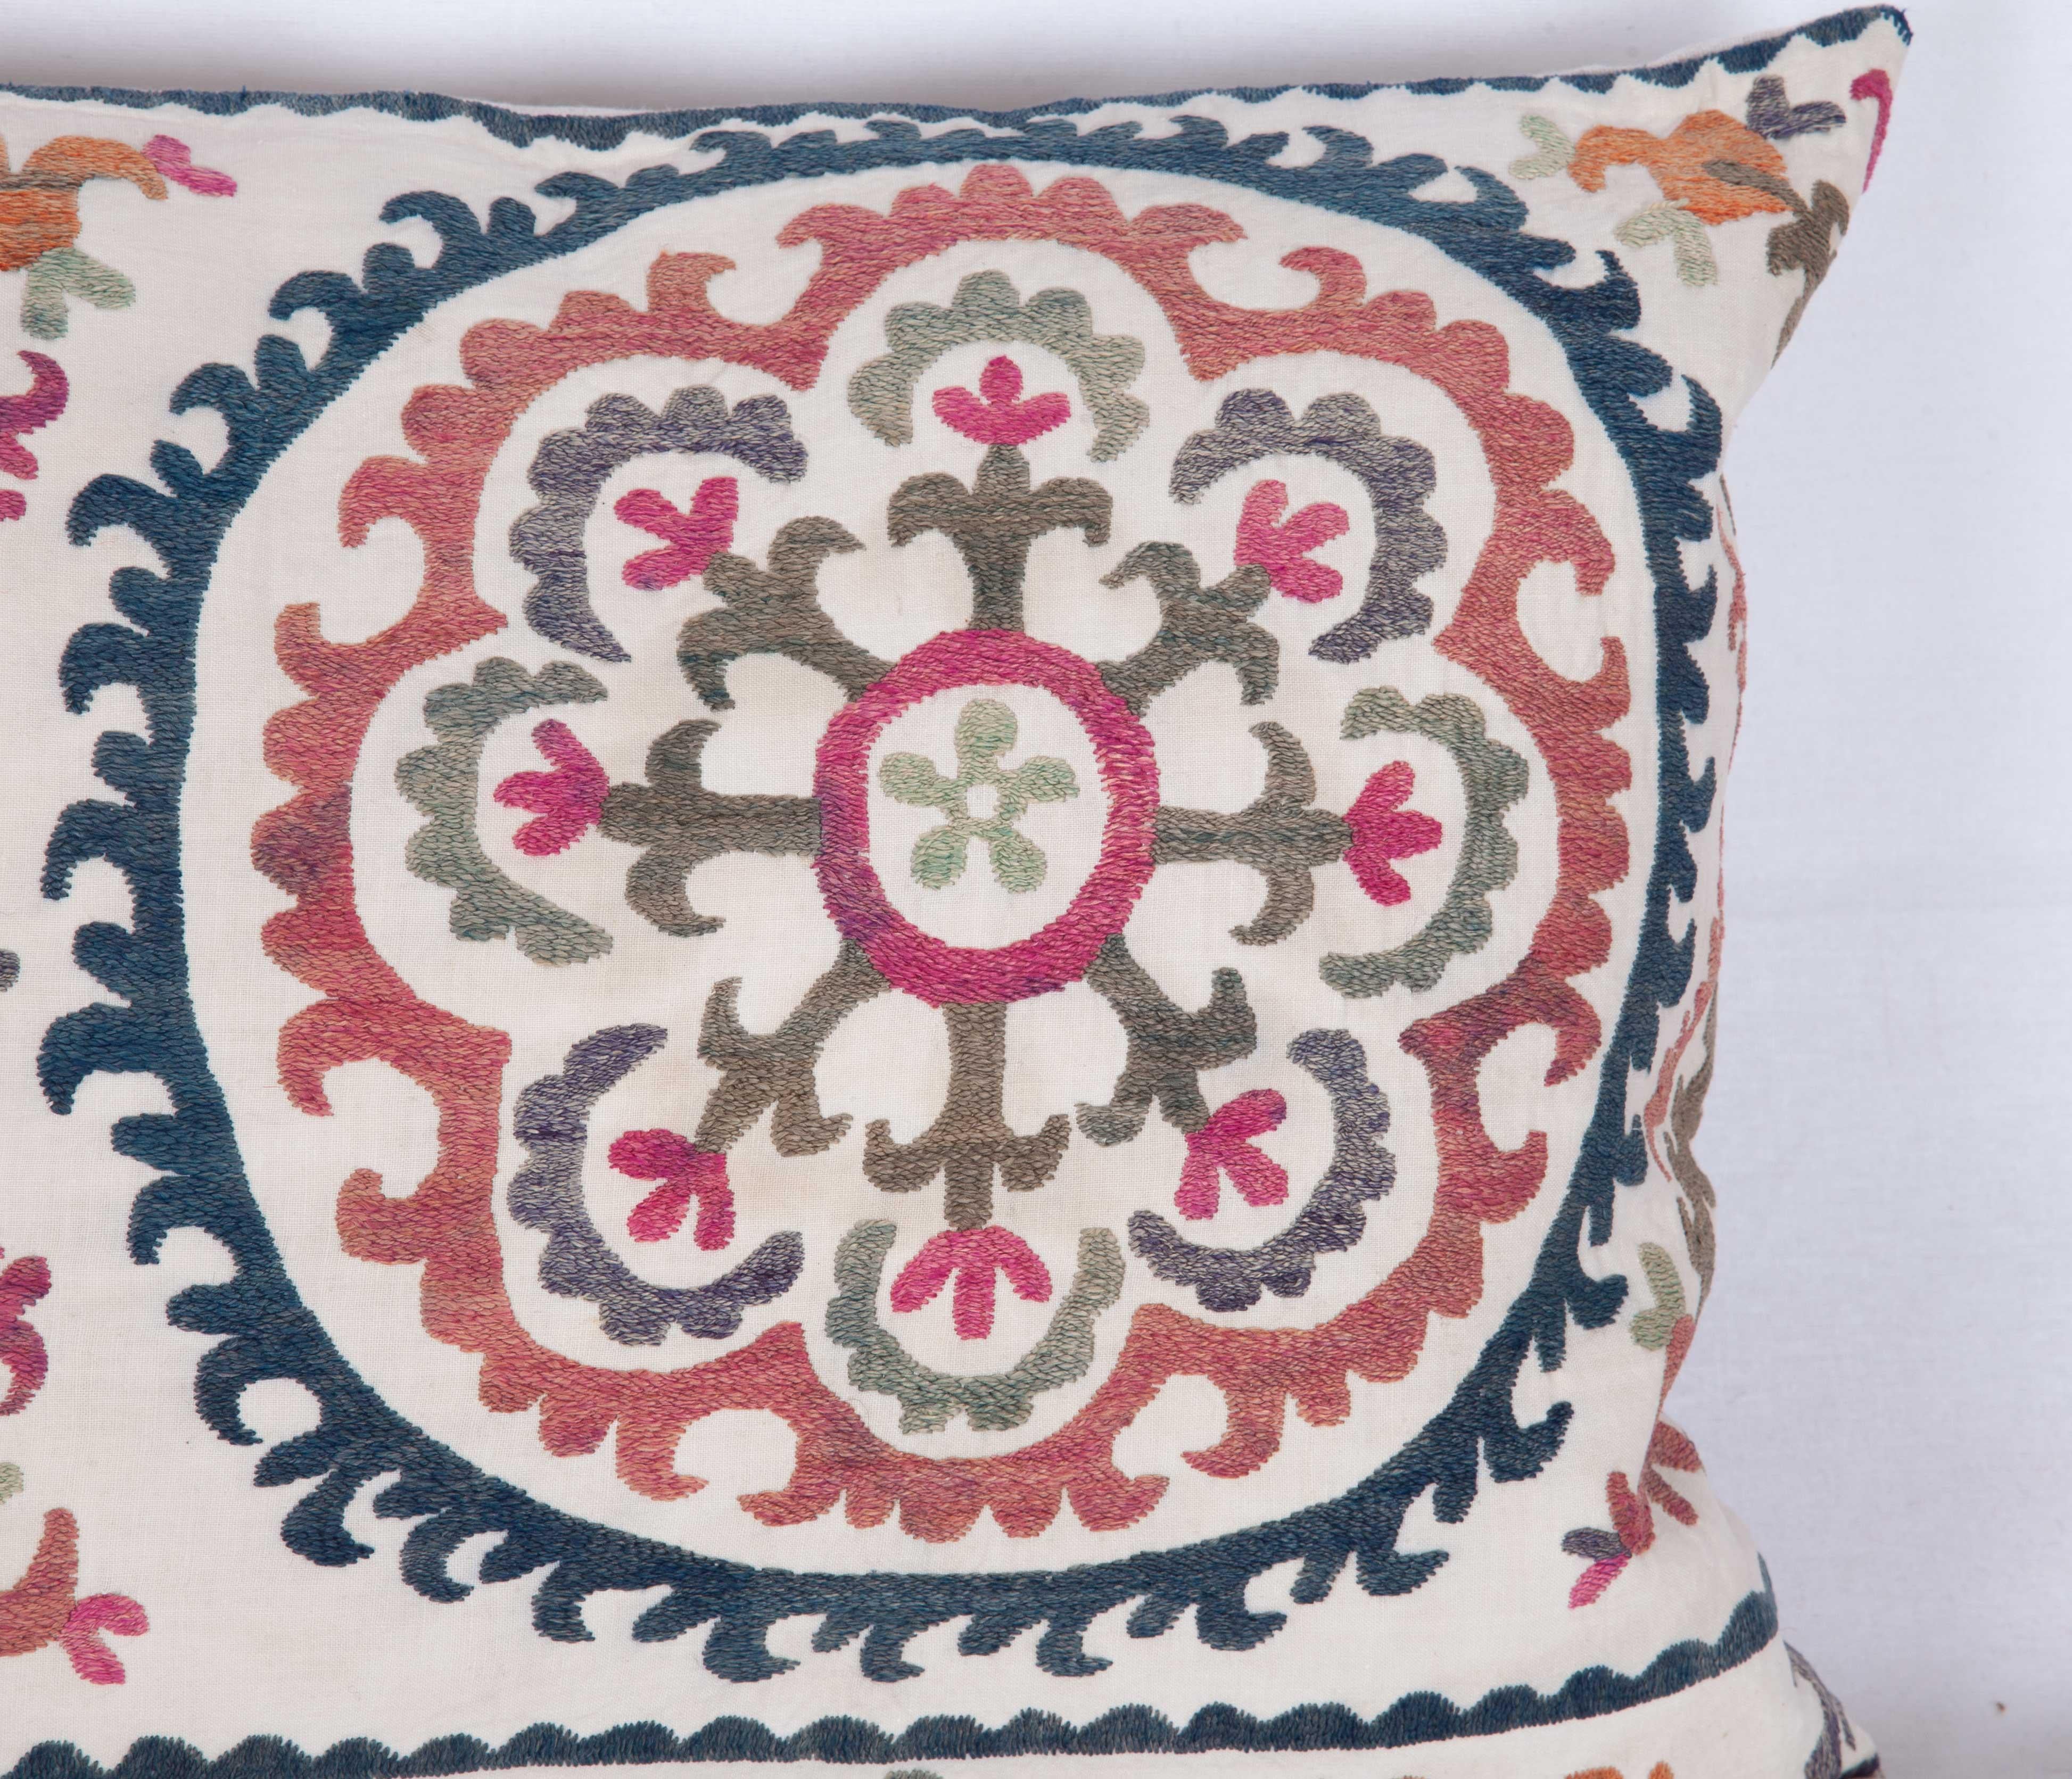 Embroidered Suzani Lumbar Pillow Case Fashioned from a Vintage Suzani